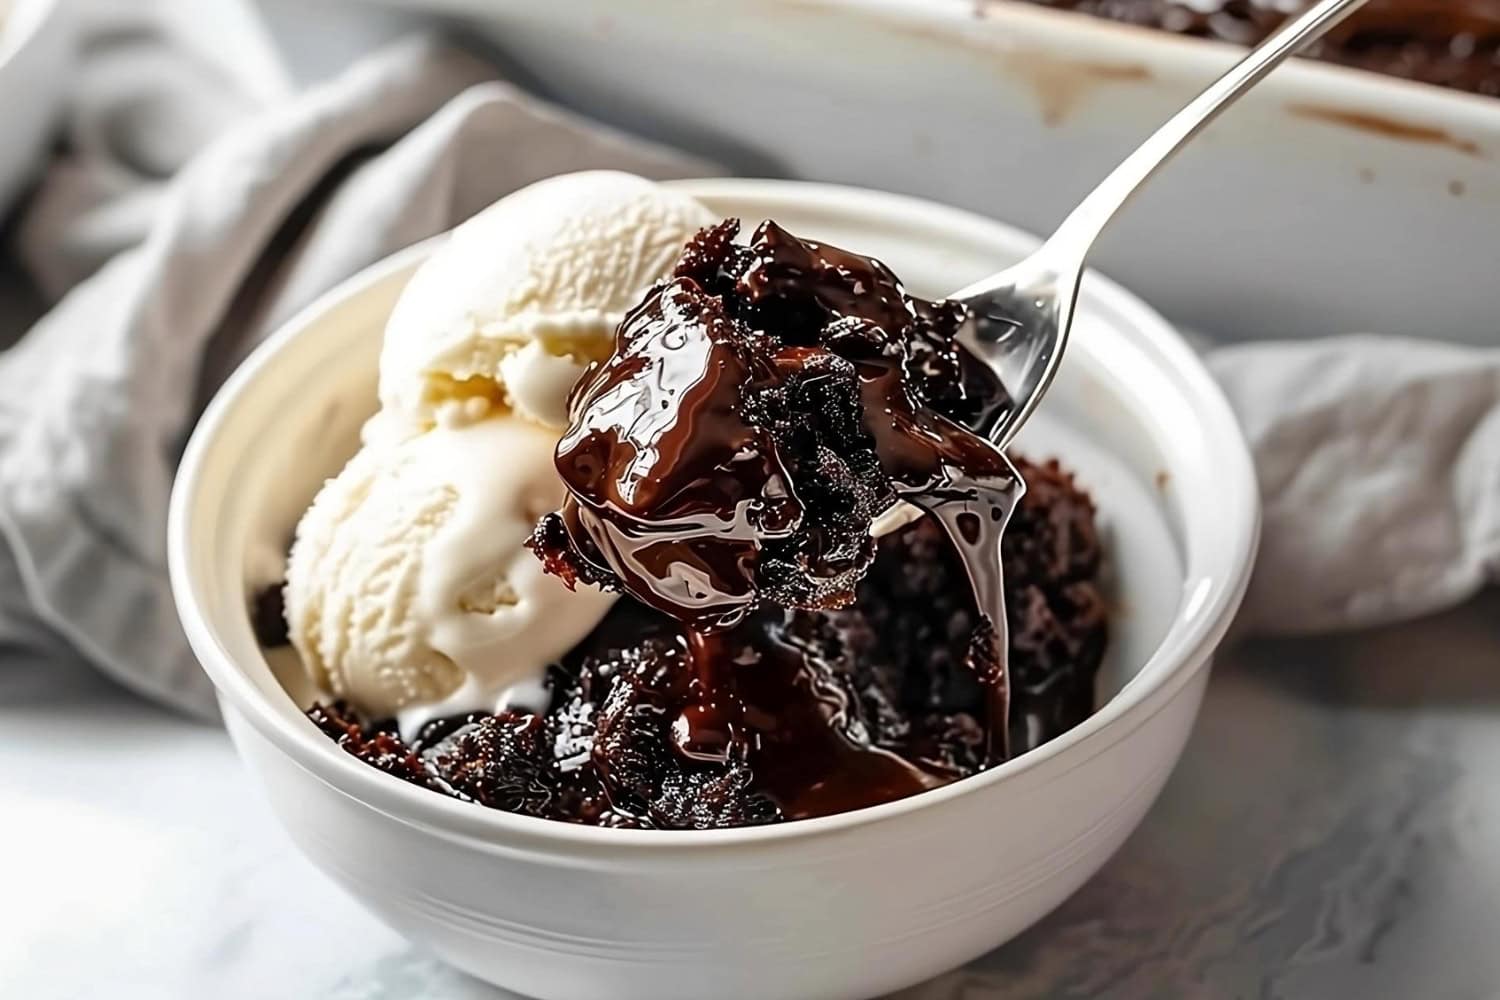 Spoon scooping a serving of hot fudge cake with ice cream served on a white bowl.